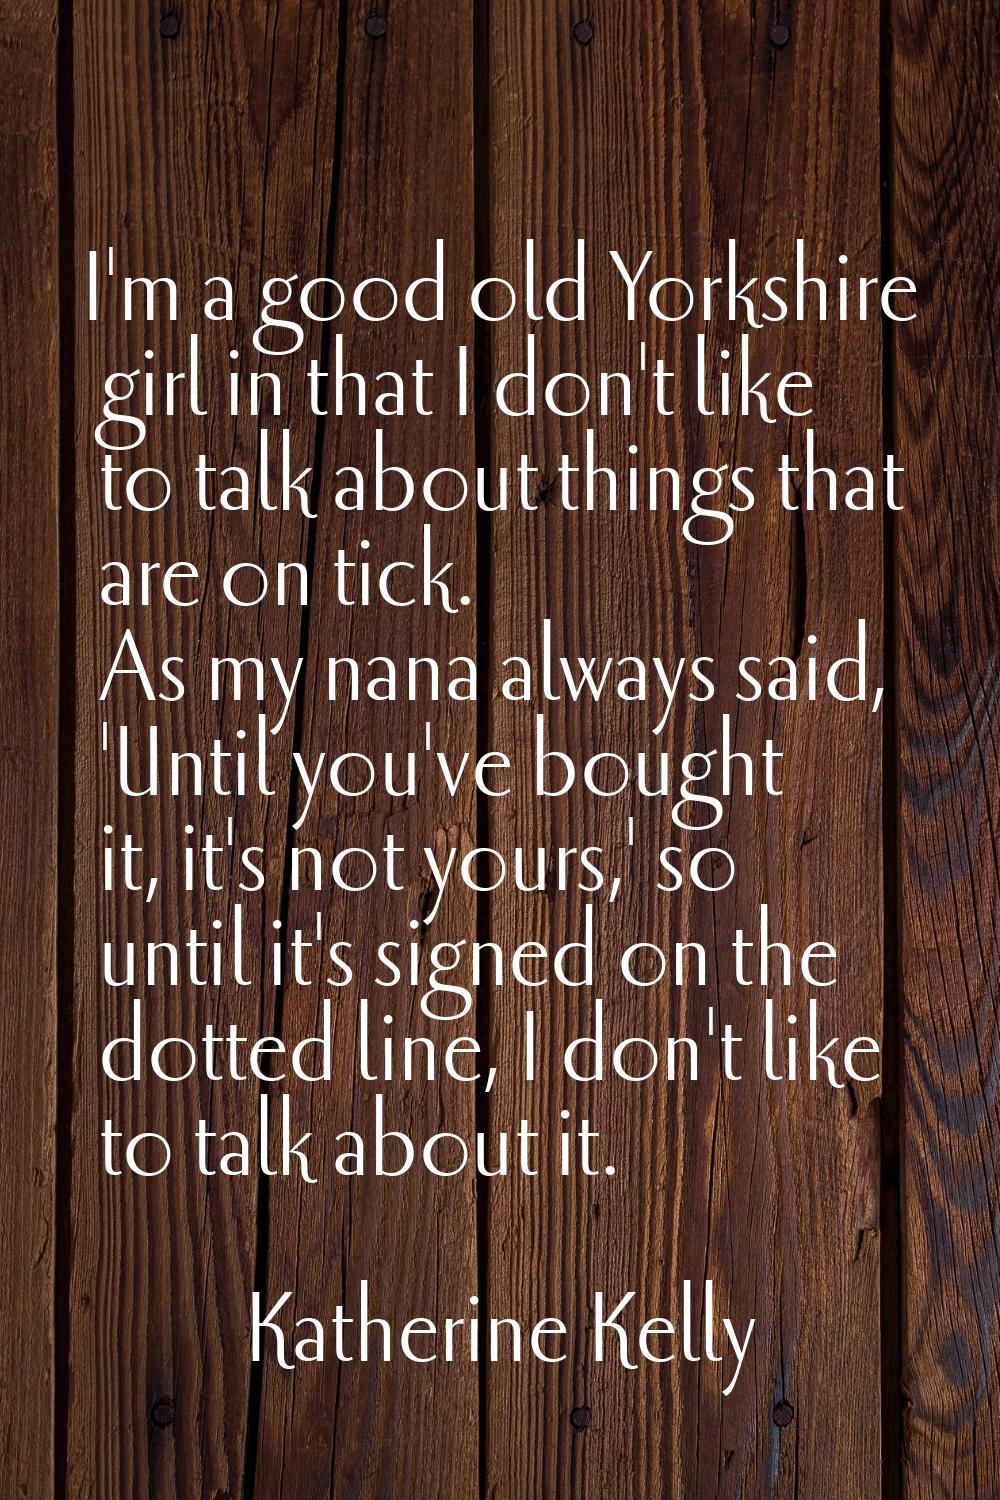 I'm a good old Yorkshire girl in that I don't like to talk about things that are on tick. As my nan